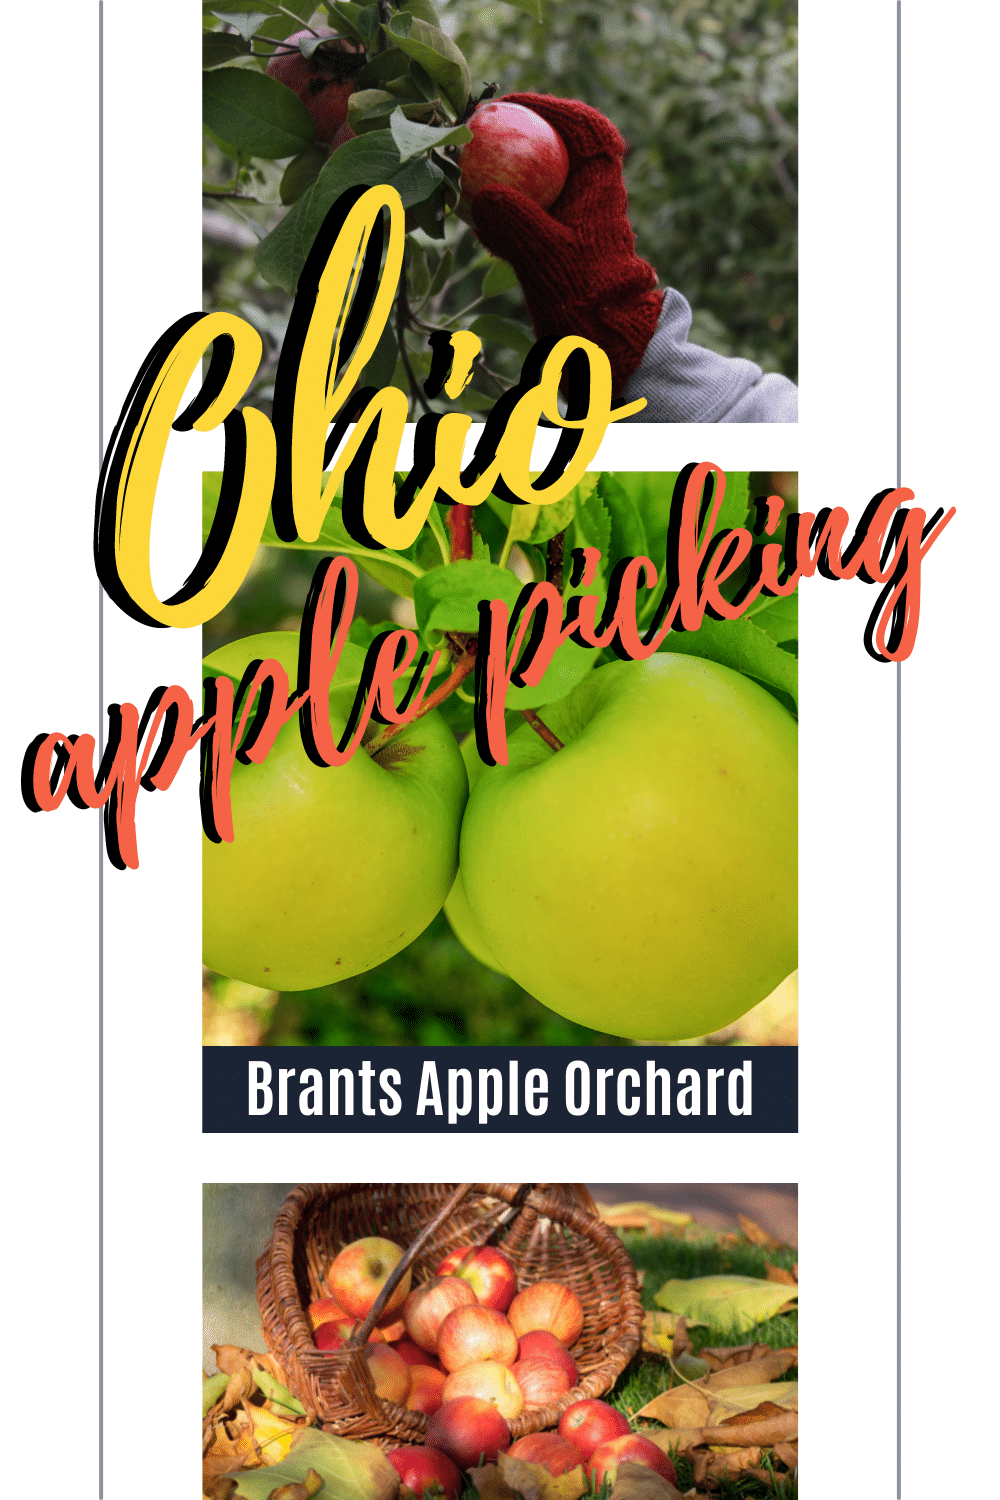 Brants Apple Orchard is a popular you pick farm in Northeast Ohio. They offer a huge selection of apples, Asian pears and table grapes. Brants Apple Orchard also offers a farm market as well as fun activities during the season for the whole family. | Apple Orchard | Ohio Apples |